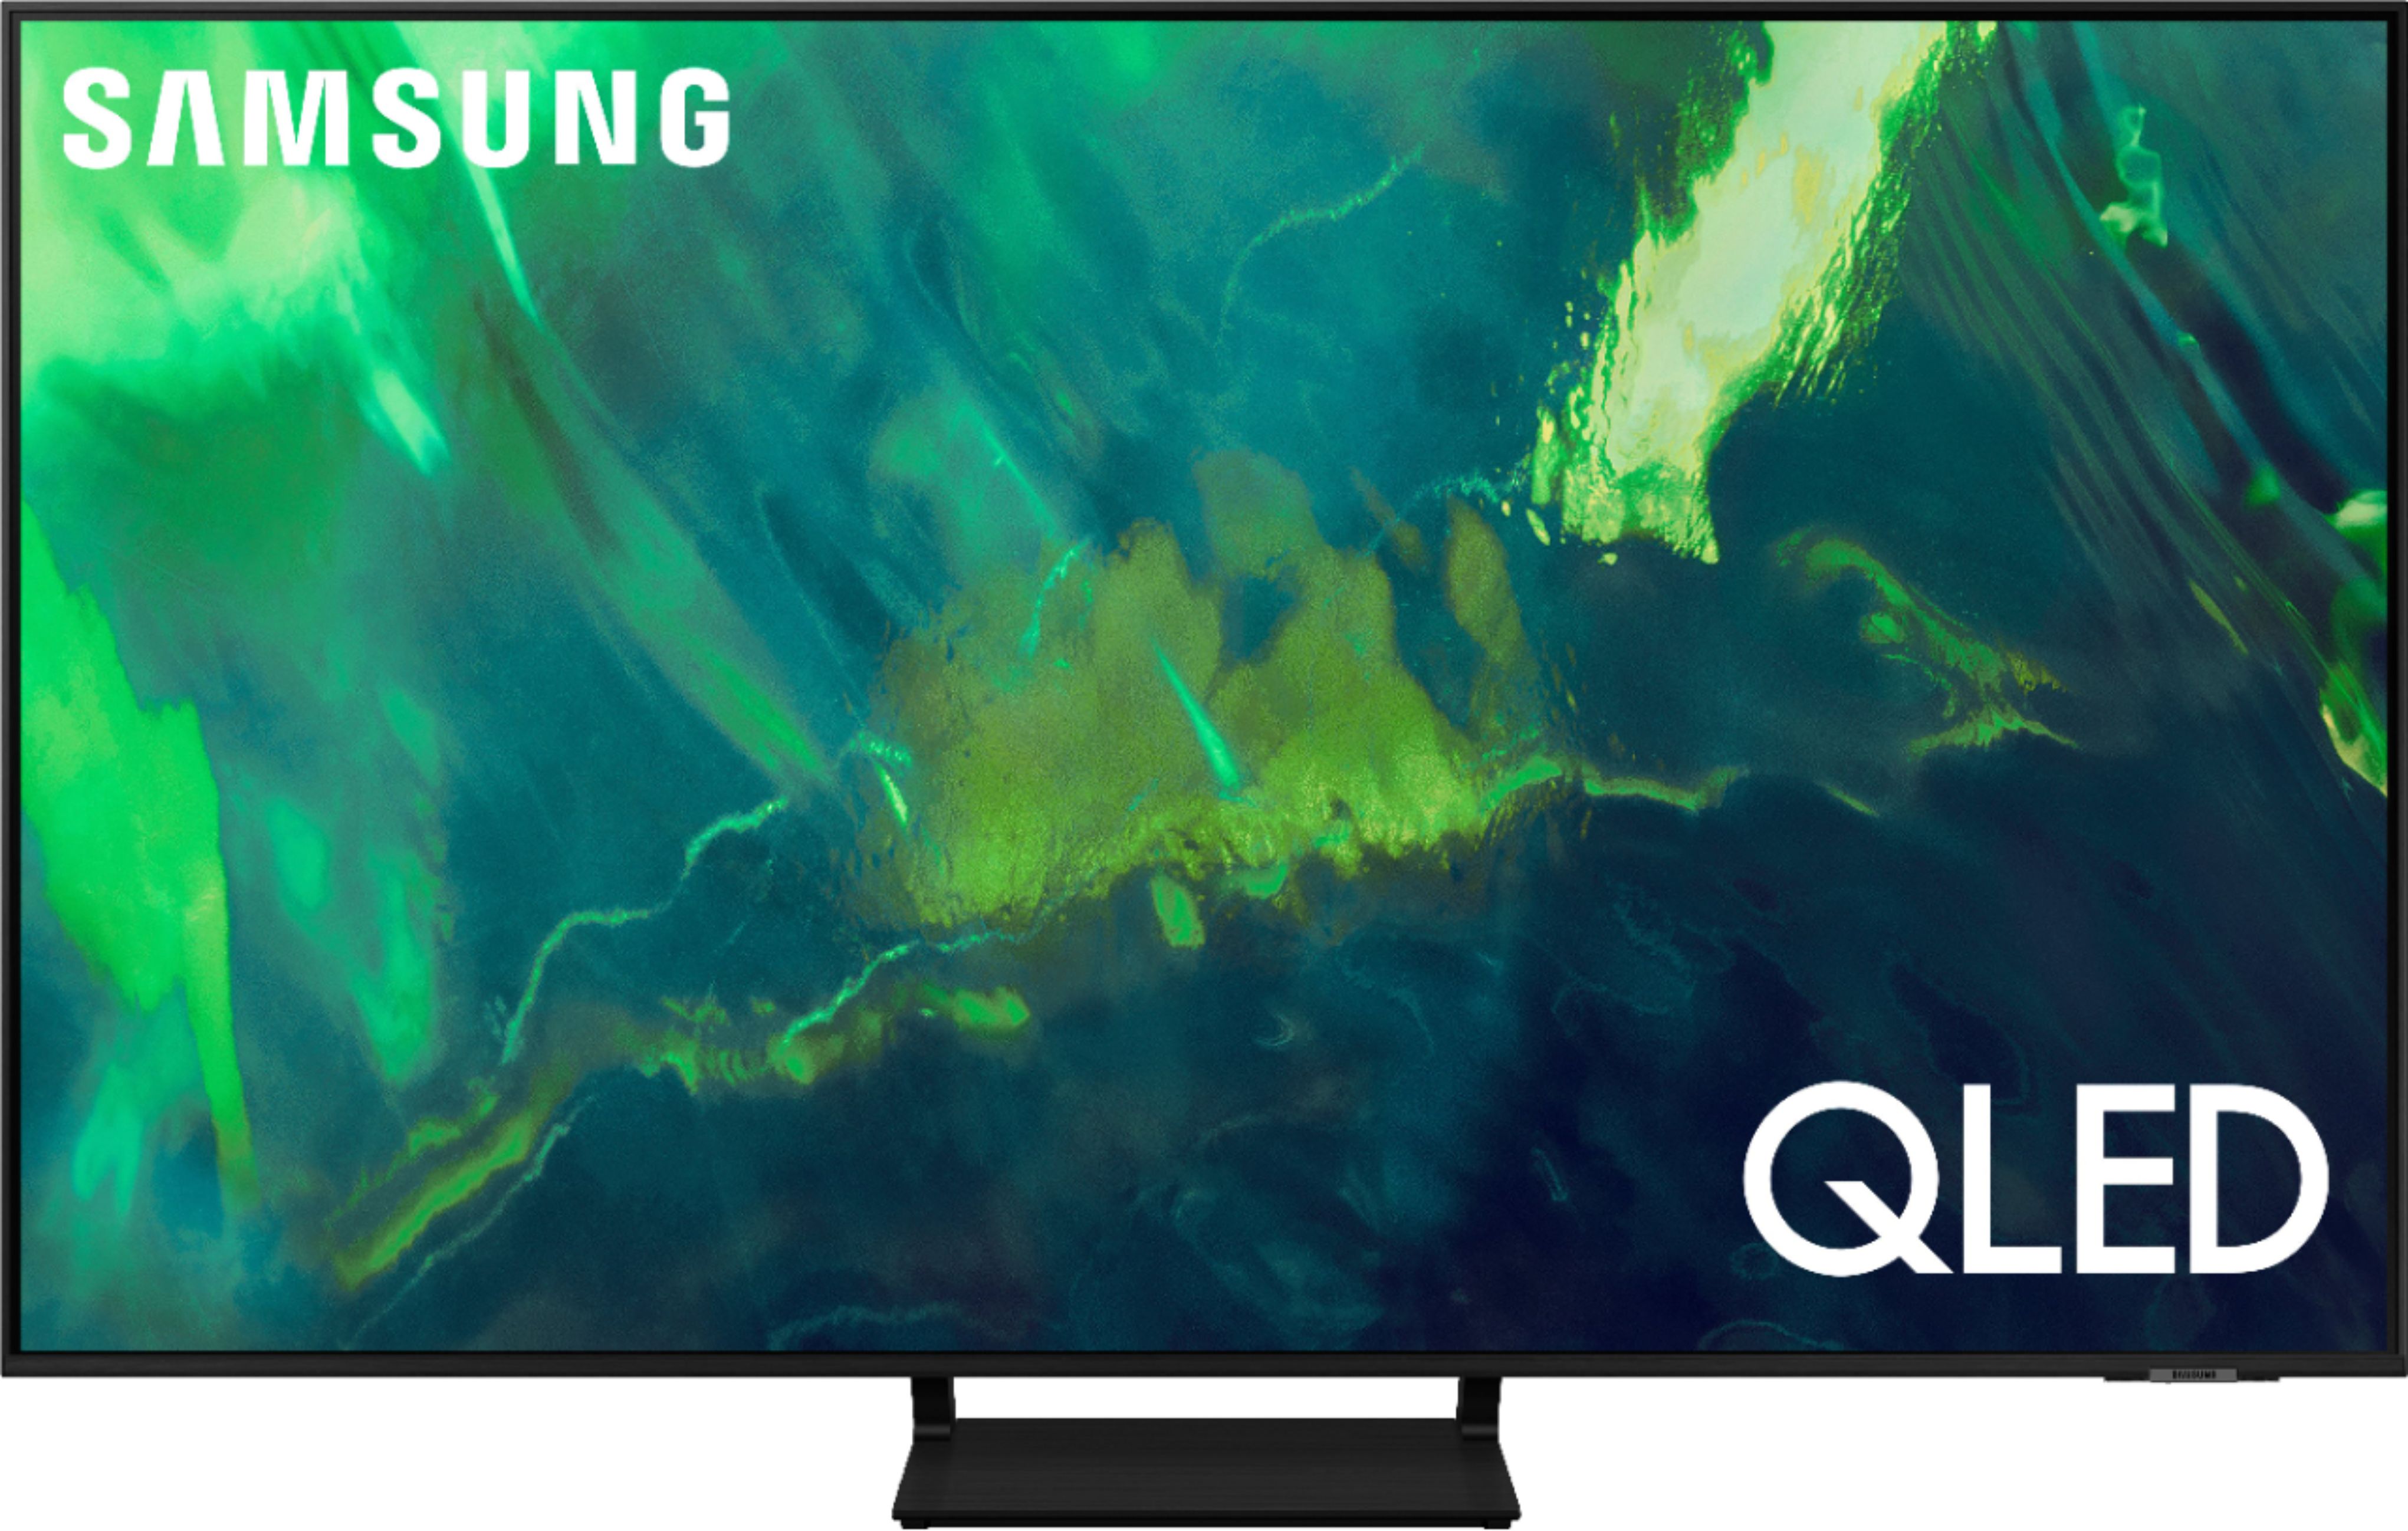 Samsung - 85" Class Q70A Series QLED 4K UHD Smart Tizen TV $2700 with $700 in gift cards at Best Buy